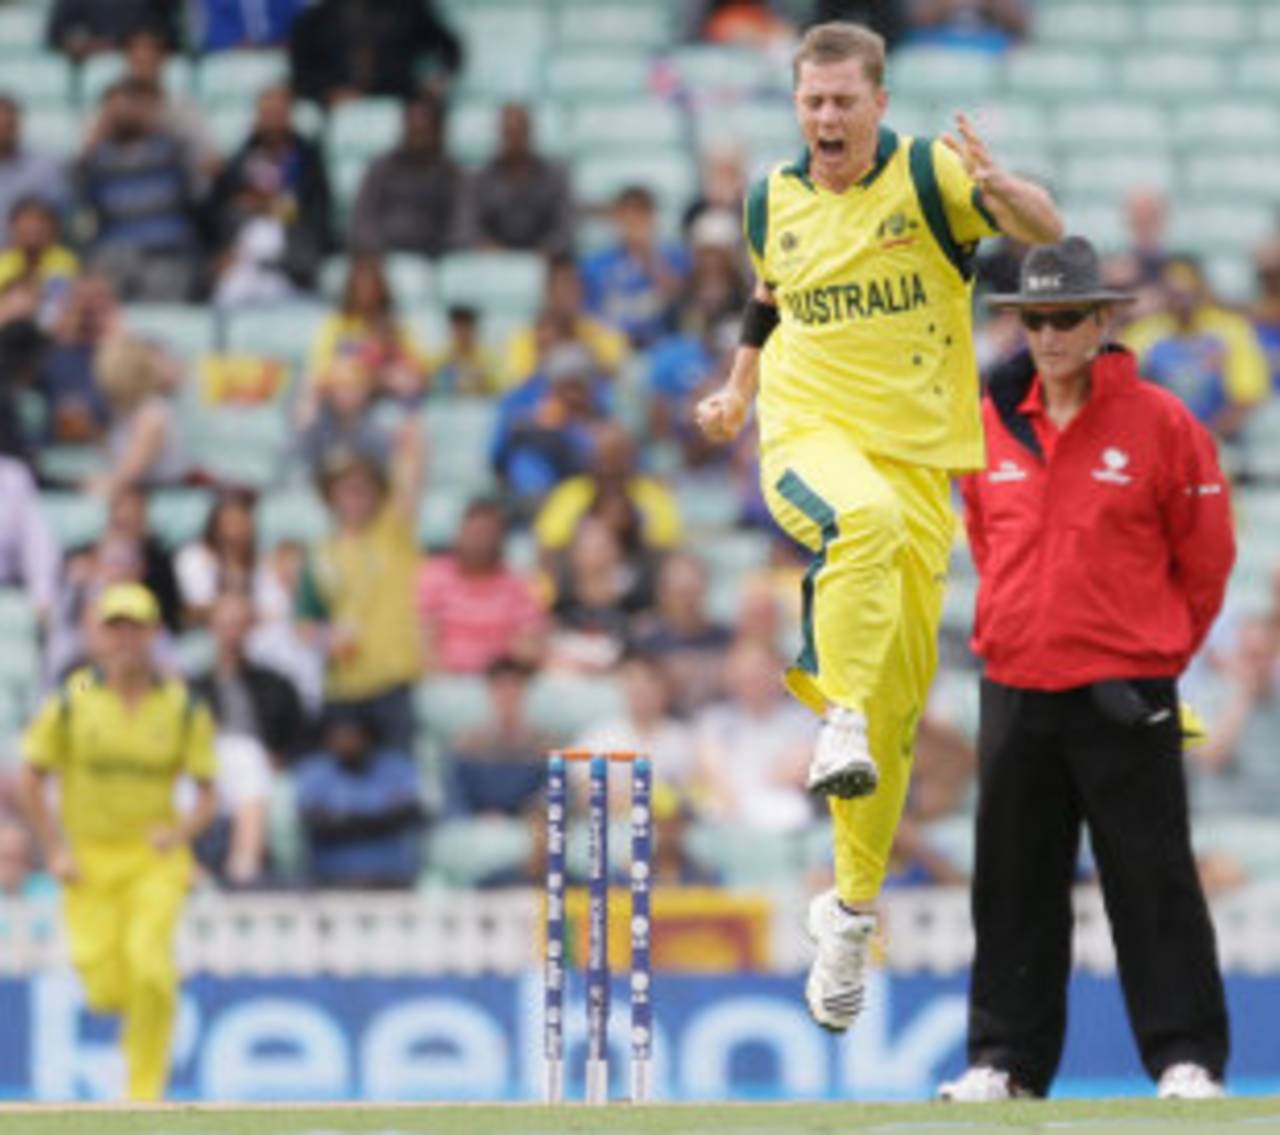 Xavier Doherty jumps in joy after getting a wicket, Australia v Sri Lanka, Champions Trophy, Group A, The Oval, June 17, 2013